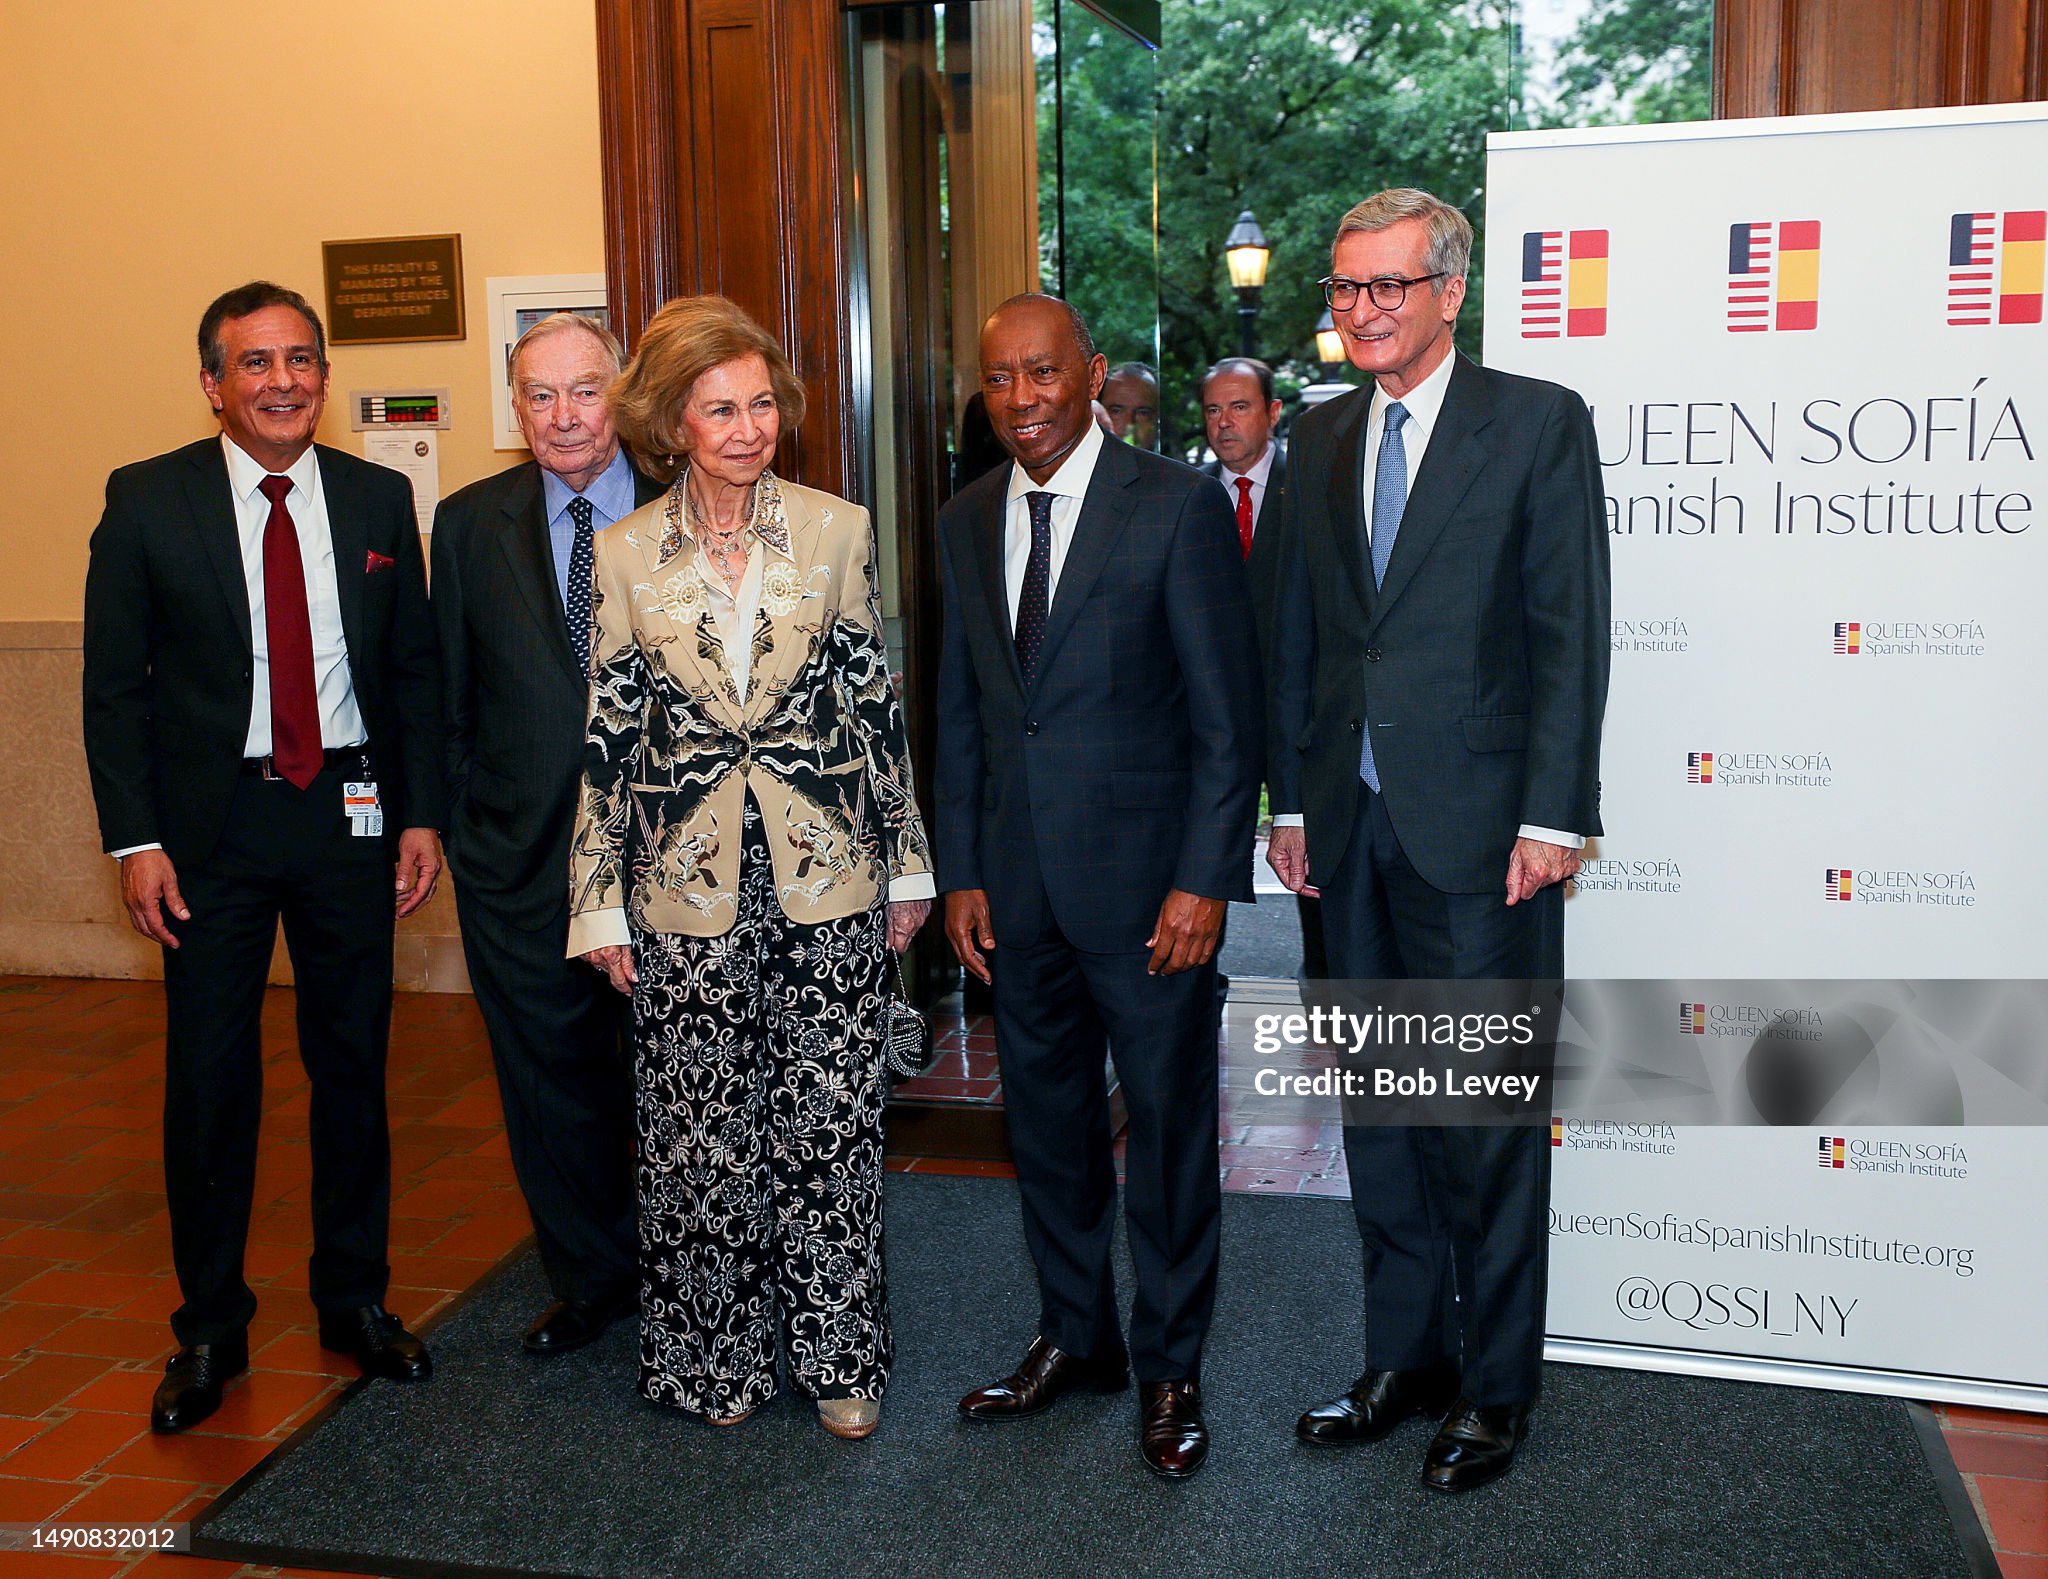 queen-sofia-of-spain-and-houston-mayor-sylvester-turner-with-guests-at-julia-ideson-building.jpg